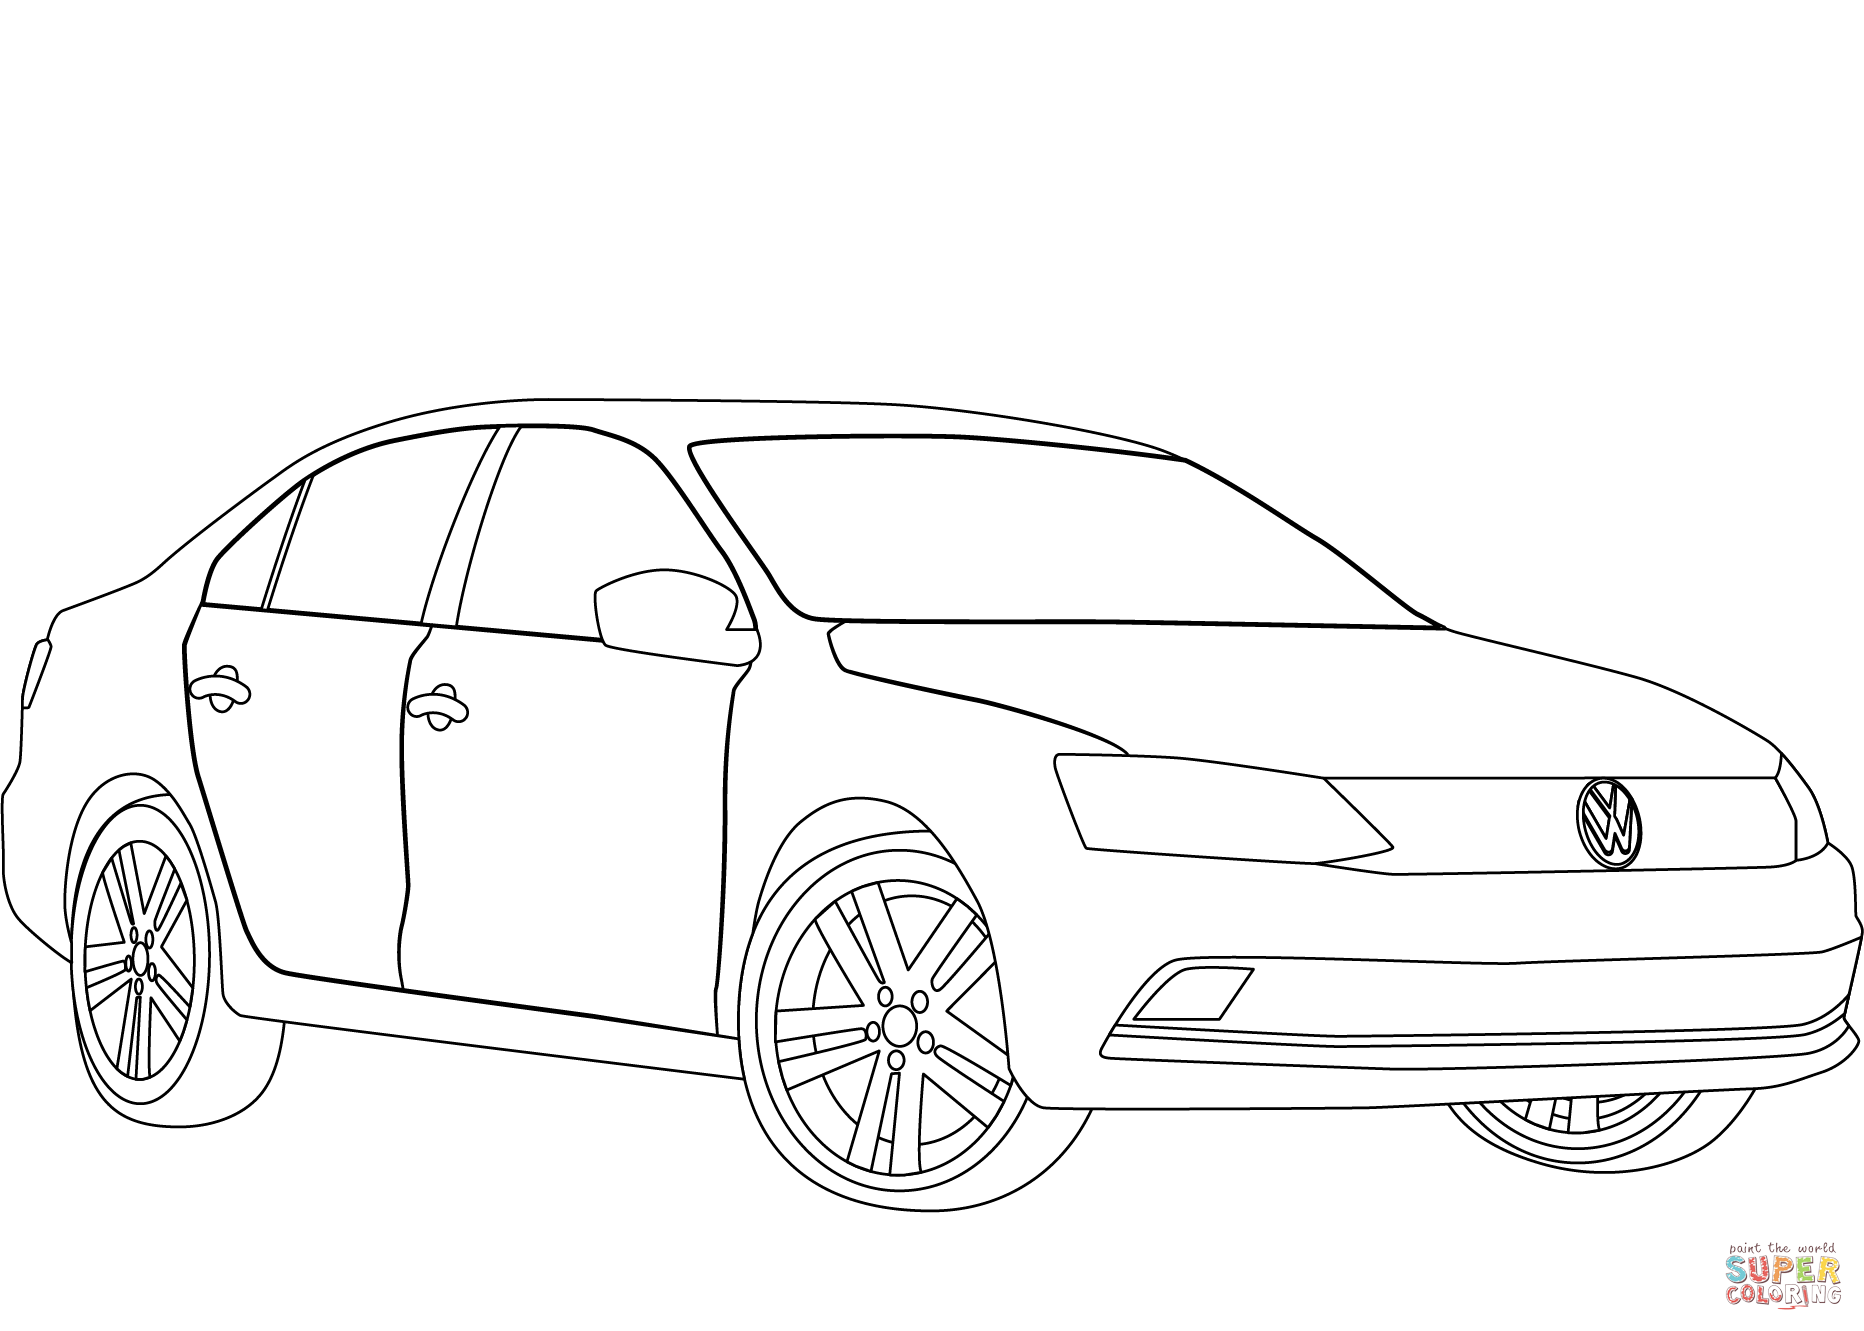 Volkswagen jetta coloring page free printable coloring pages